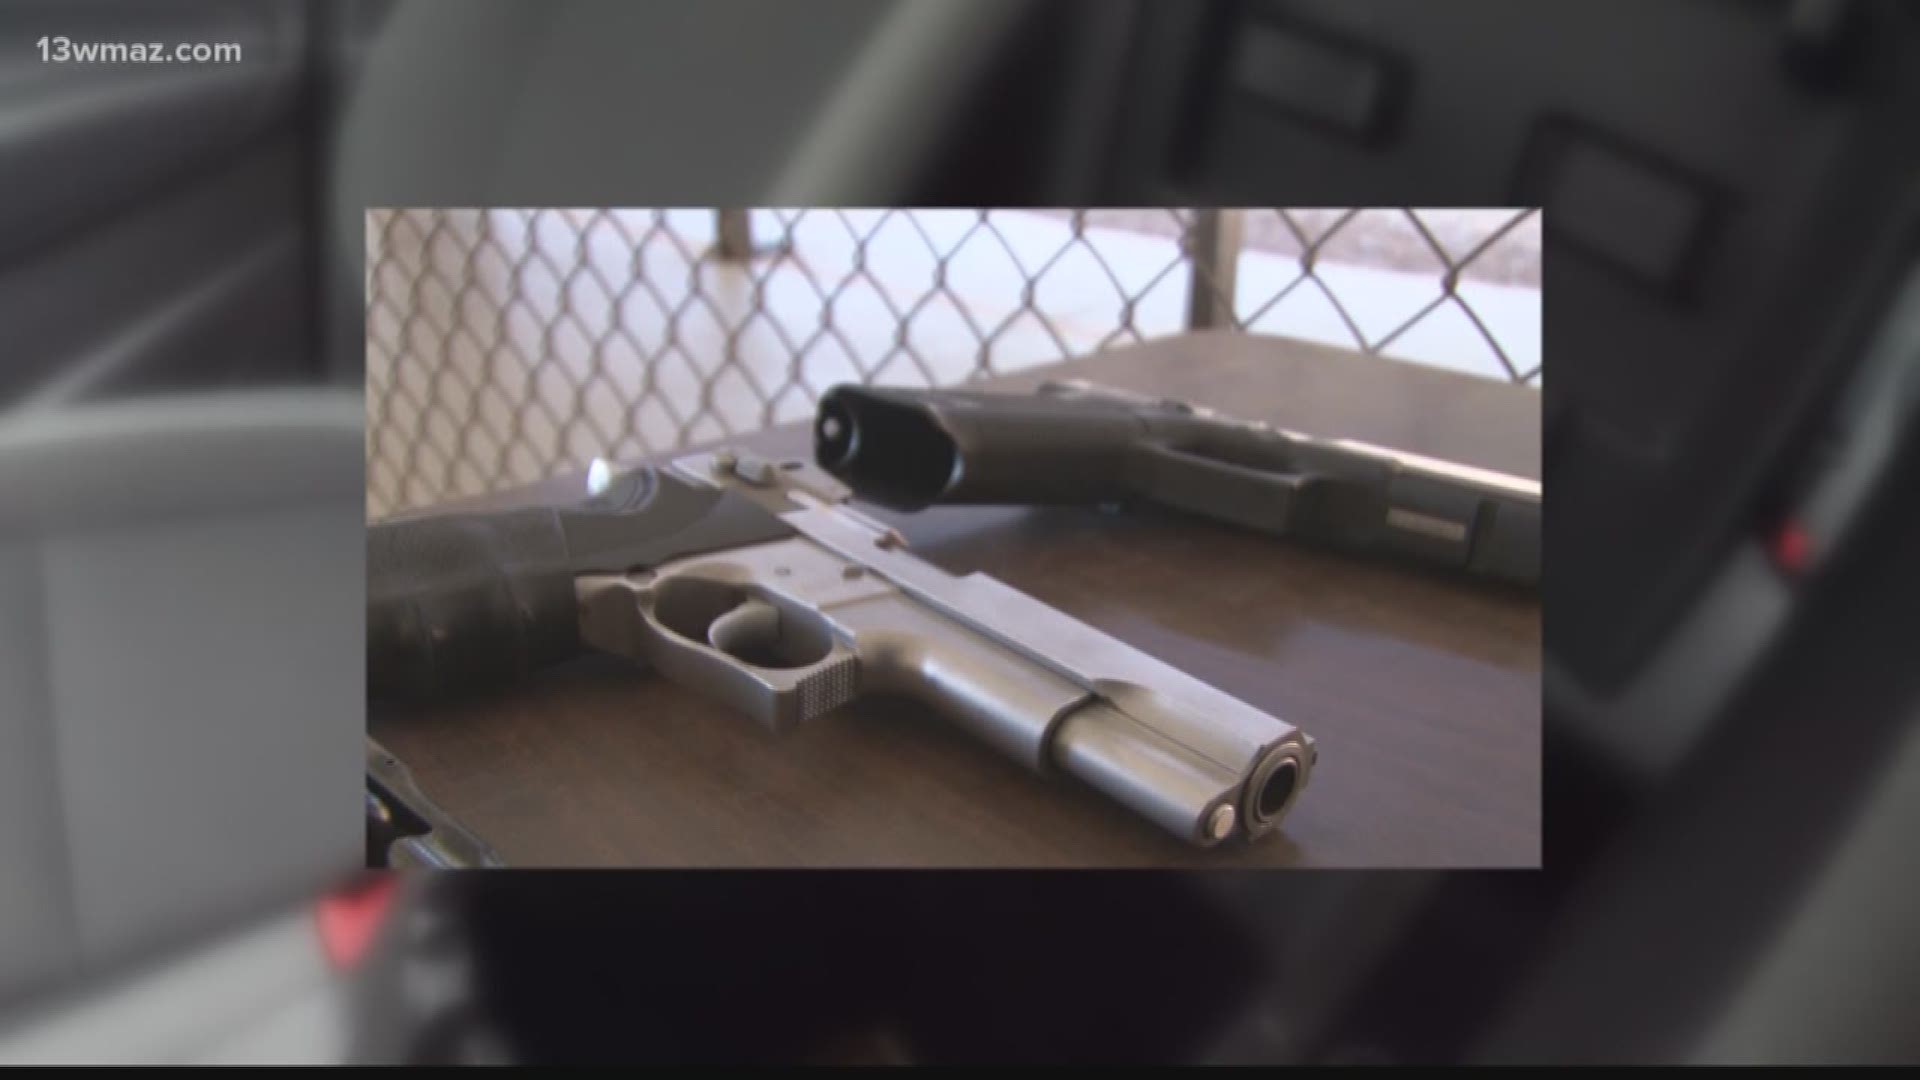 Over the past few weeks, the Monroe County Sheriff's Office says they have seen several guns stolen out of unlocked cars around the northern part of the county. Ensley Nichols explains what to do if your firearm gets stolen and how to prevent it.